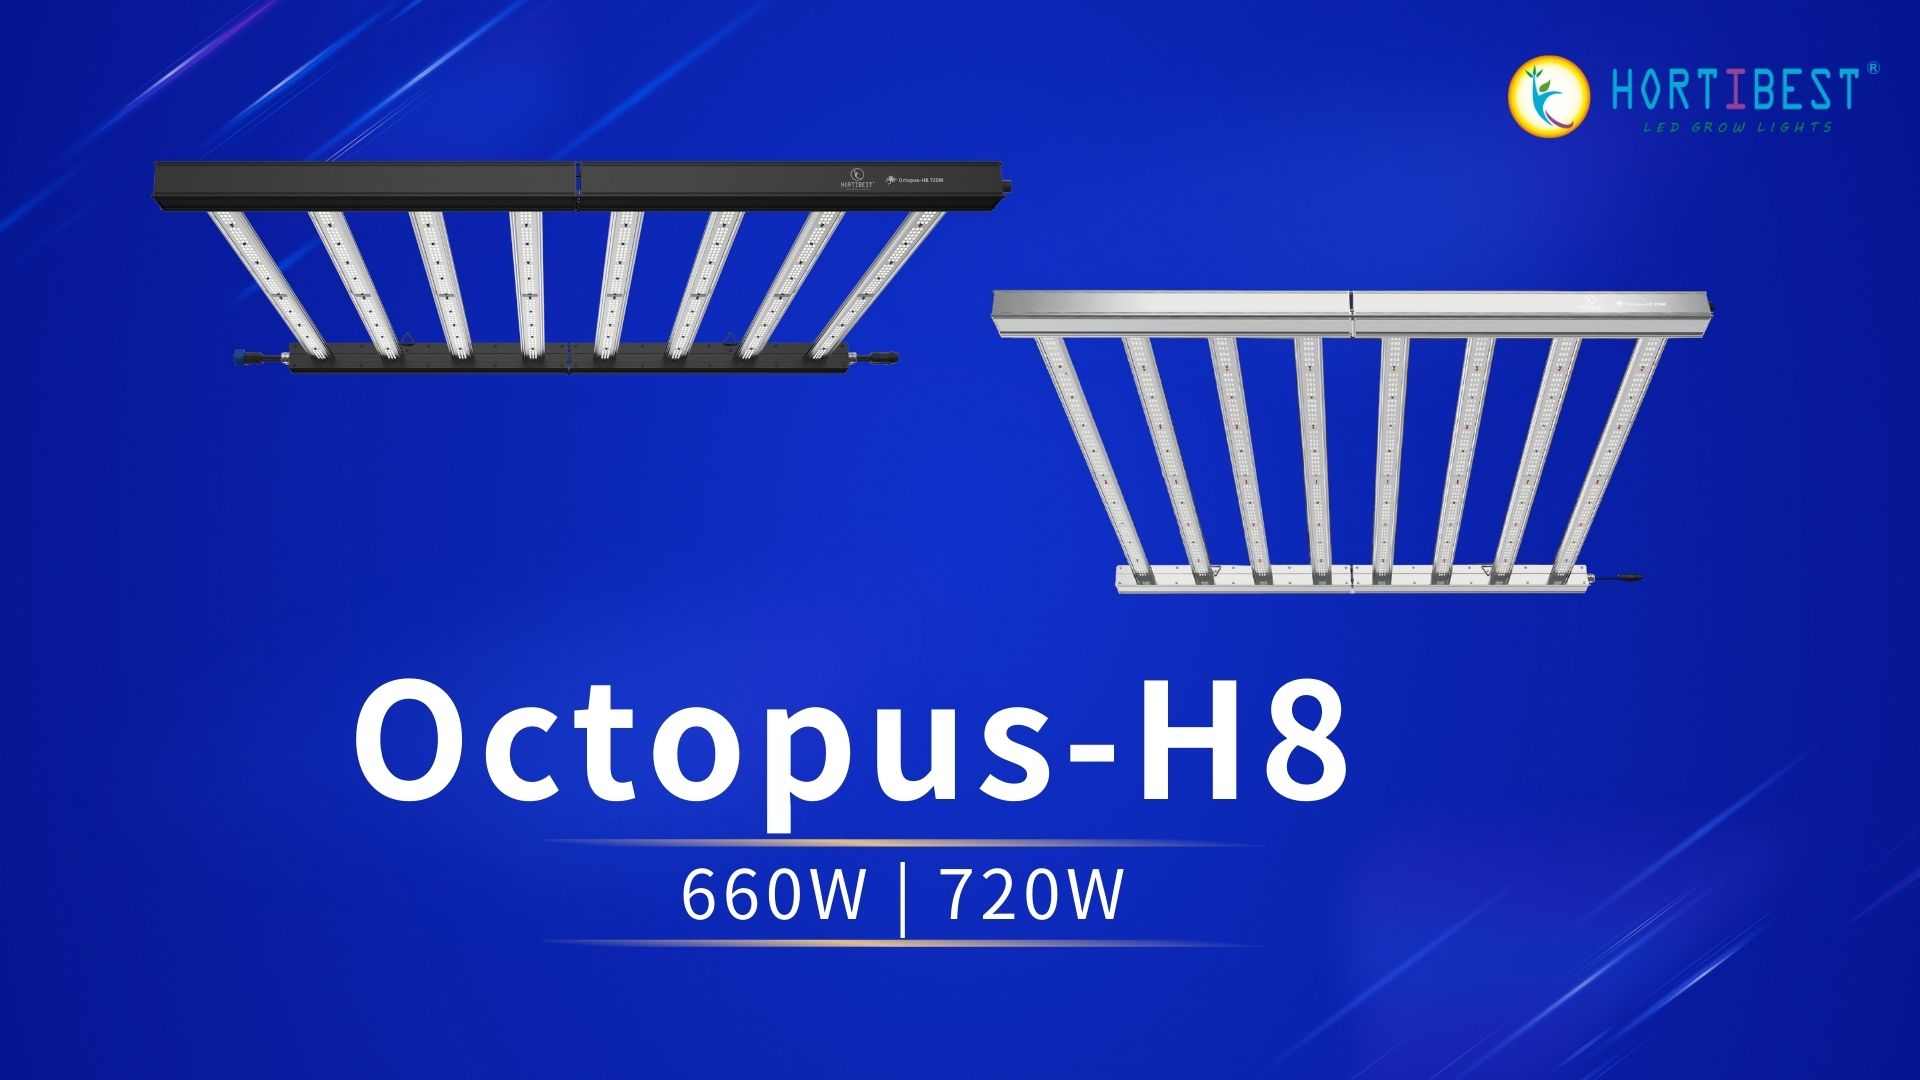 Octopus-H8 LED Grow Light for Spring Cultivation